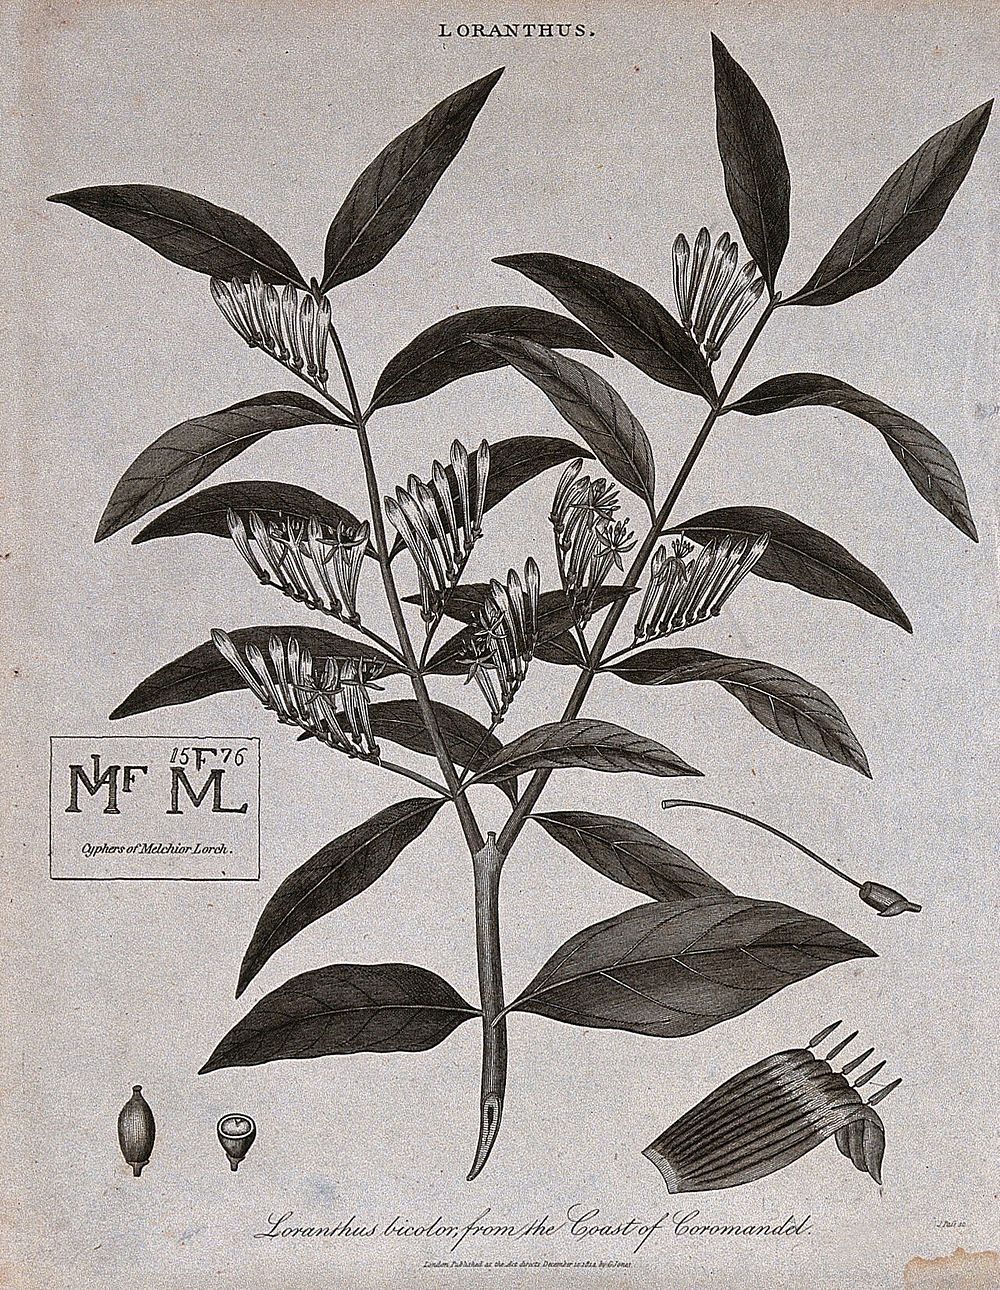 A flowering plant (Loranthus bicolor) and two ciphers of the artist, Melchior Lorch. Etching by J. Pass, c. 1814.